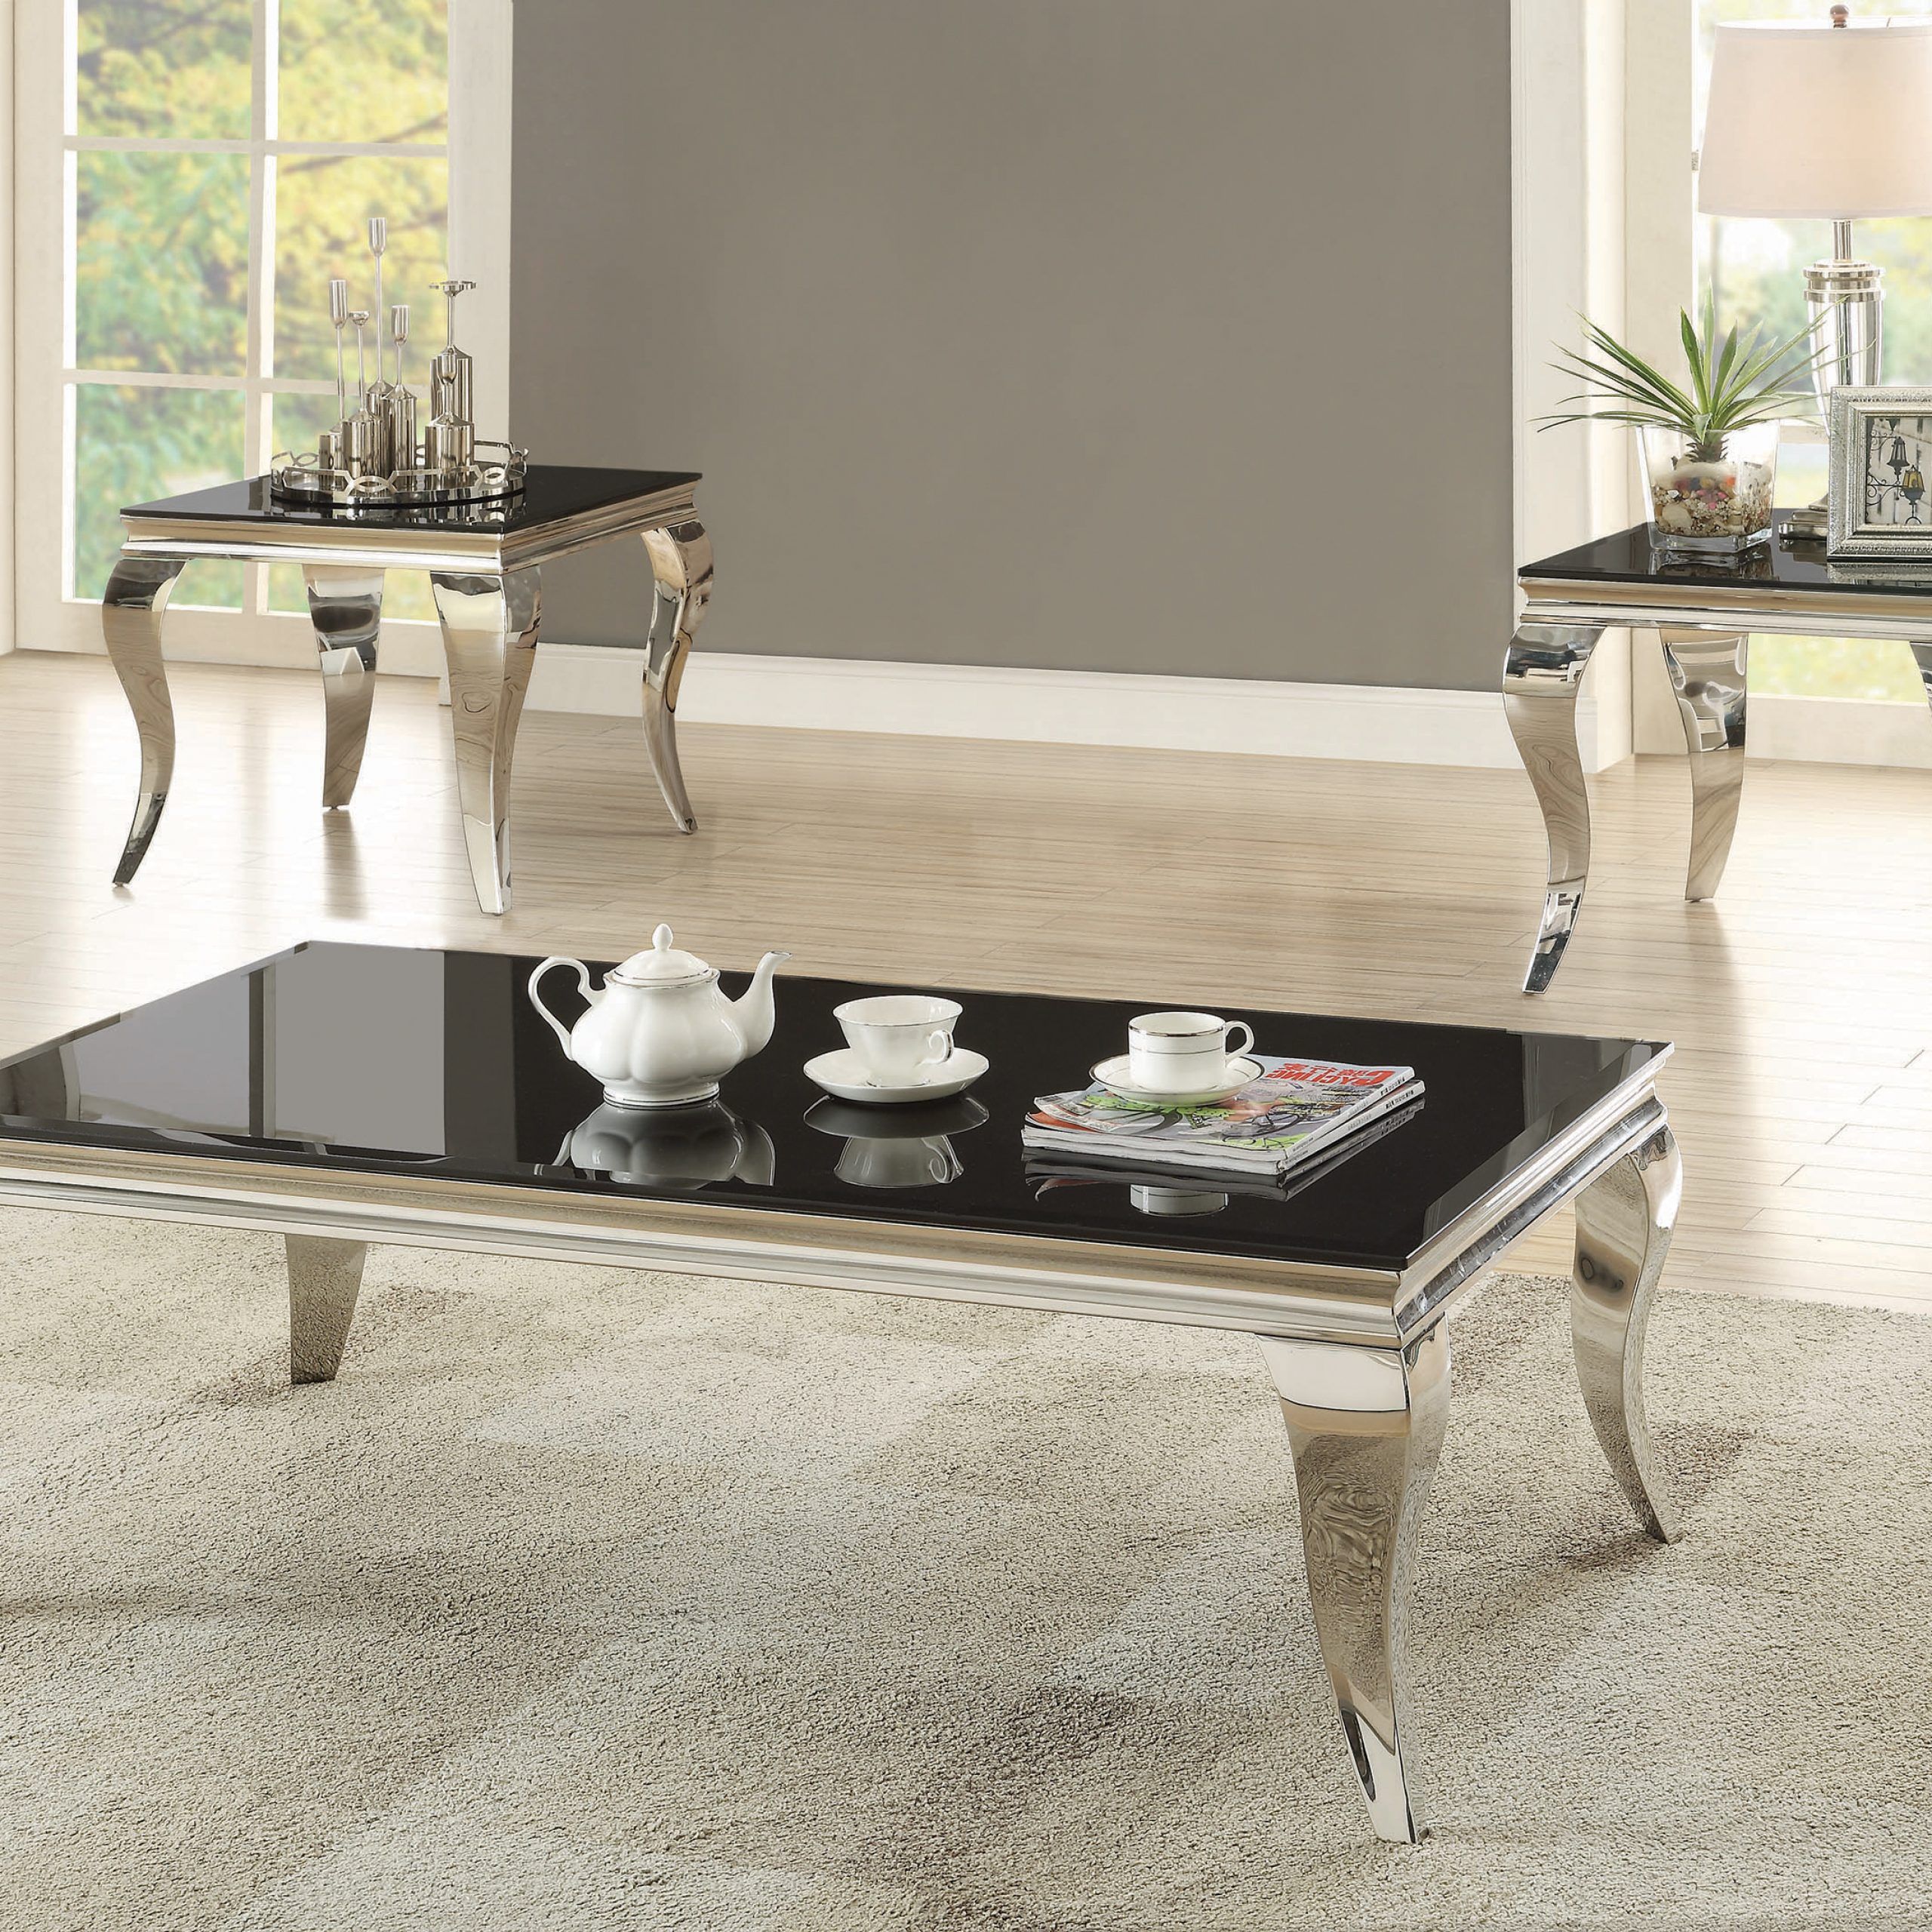 Rectangular Coffee Table Chrome And Black – Coaster Fine Fur For Popular Chrome And Glass Rectangular Coffee Tables (View 20 of 20)